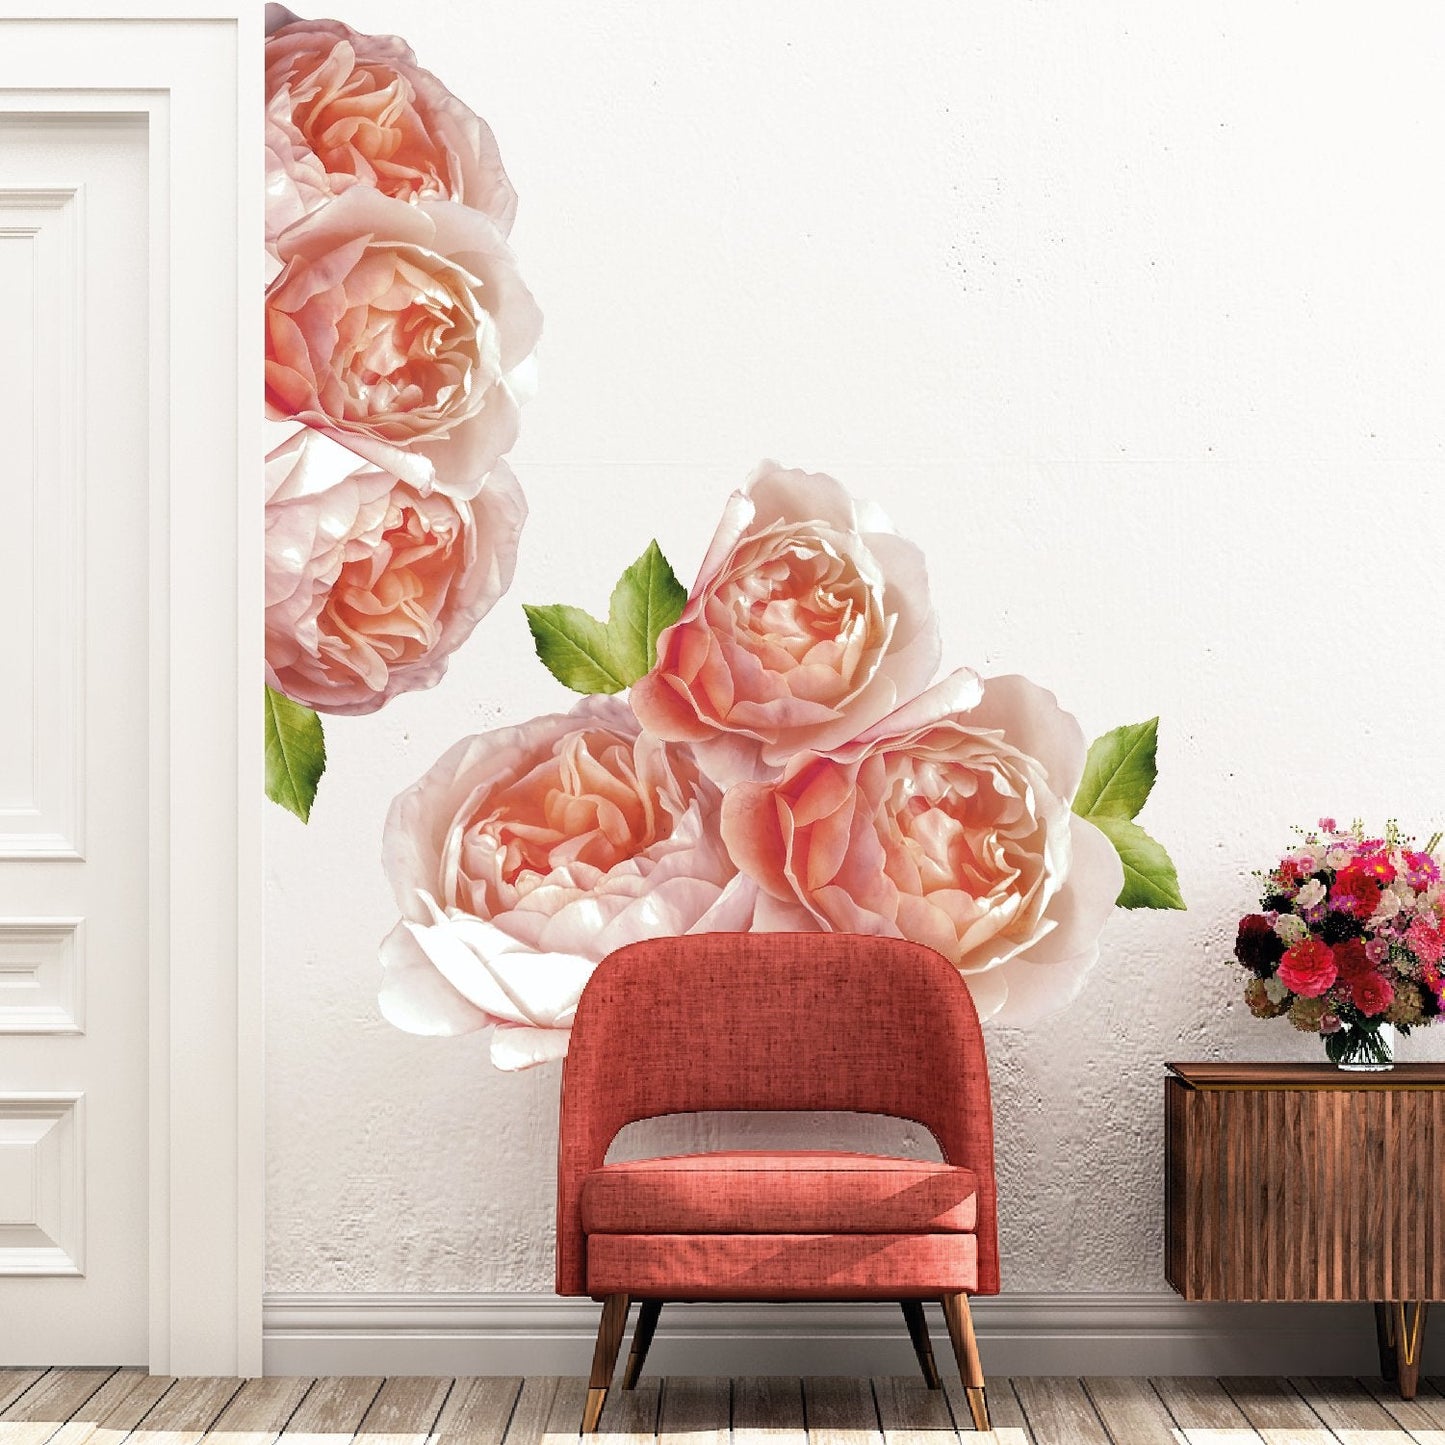 Extra Large Rose Peonies Flowers Wall Decals - Picture Perfect Decals